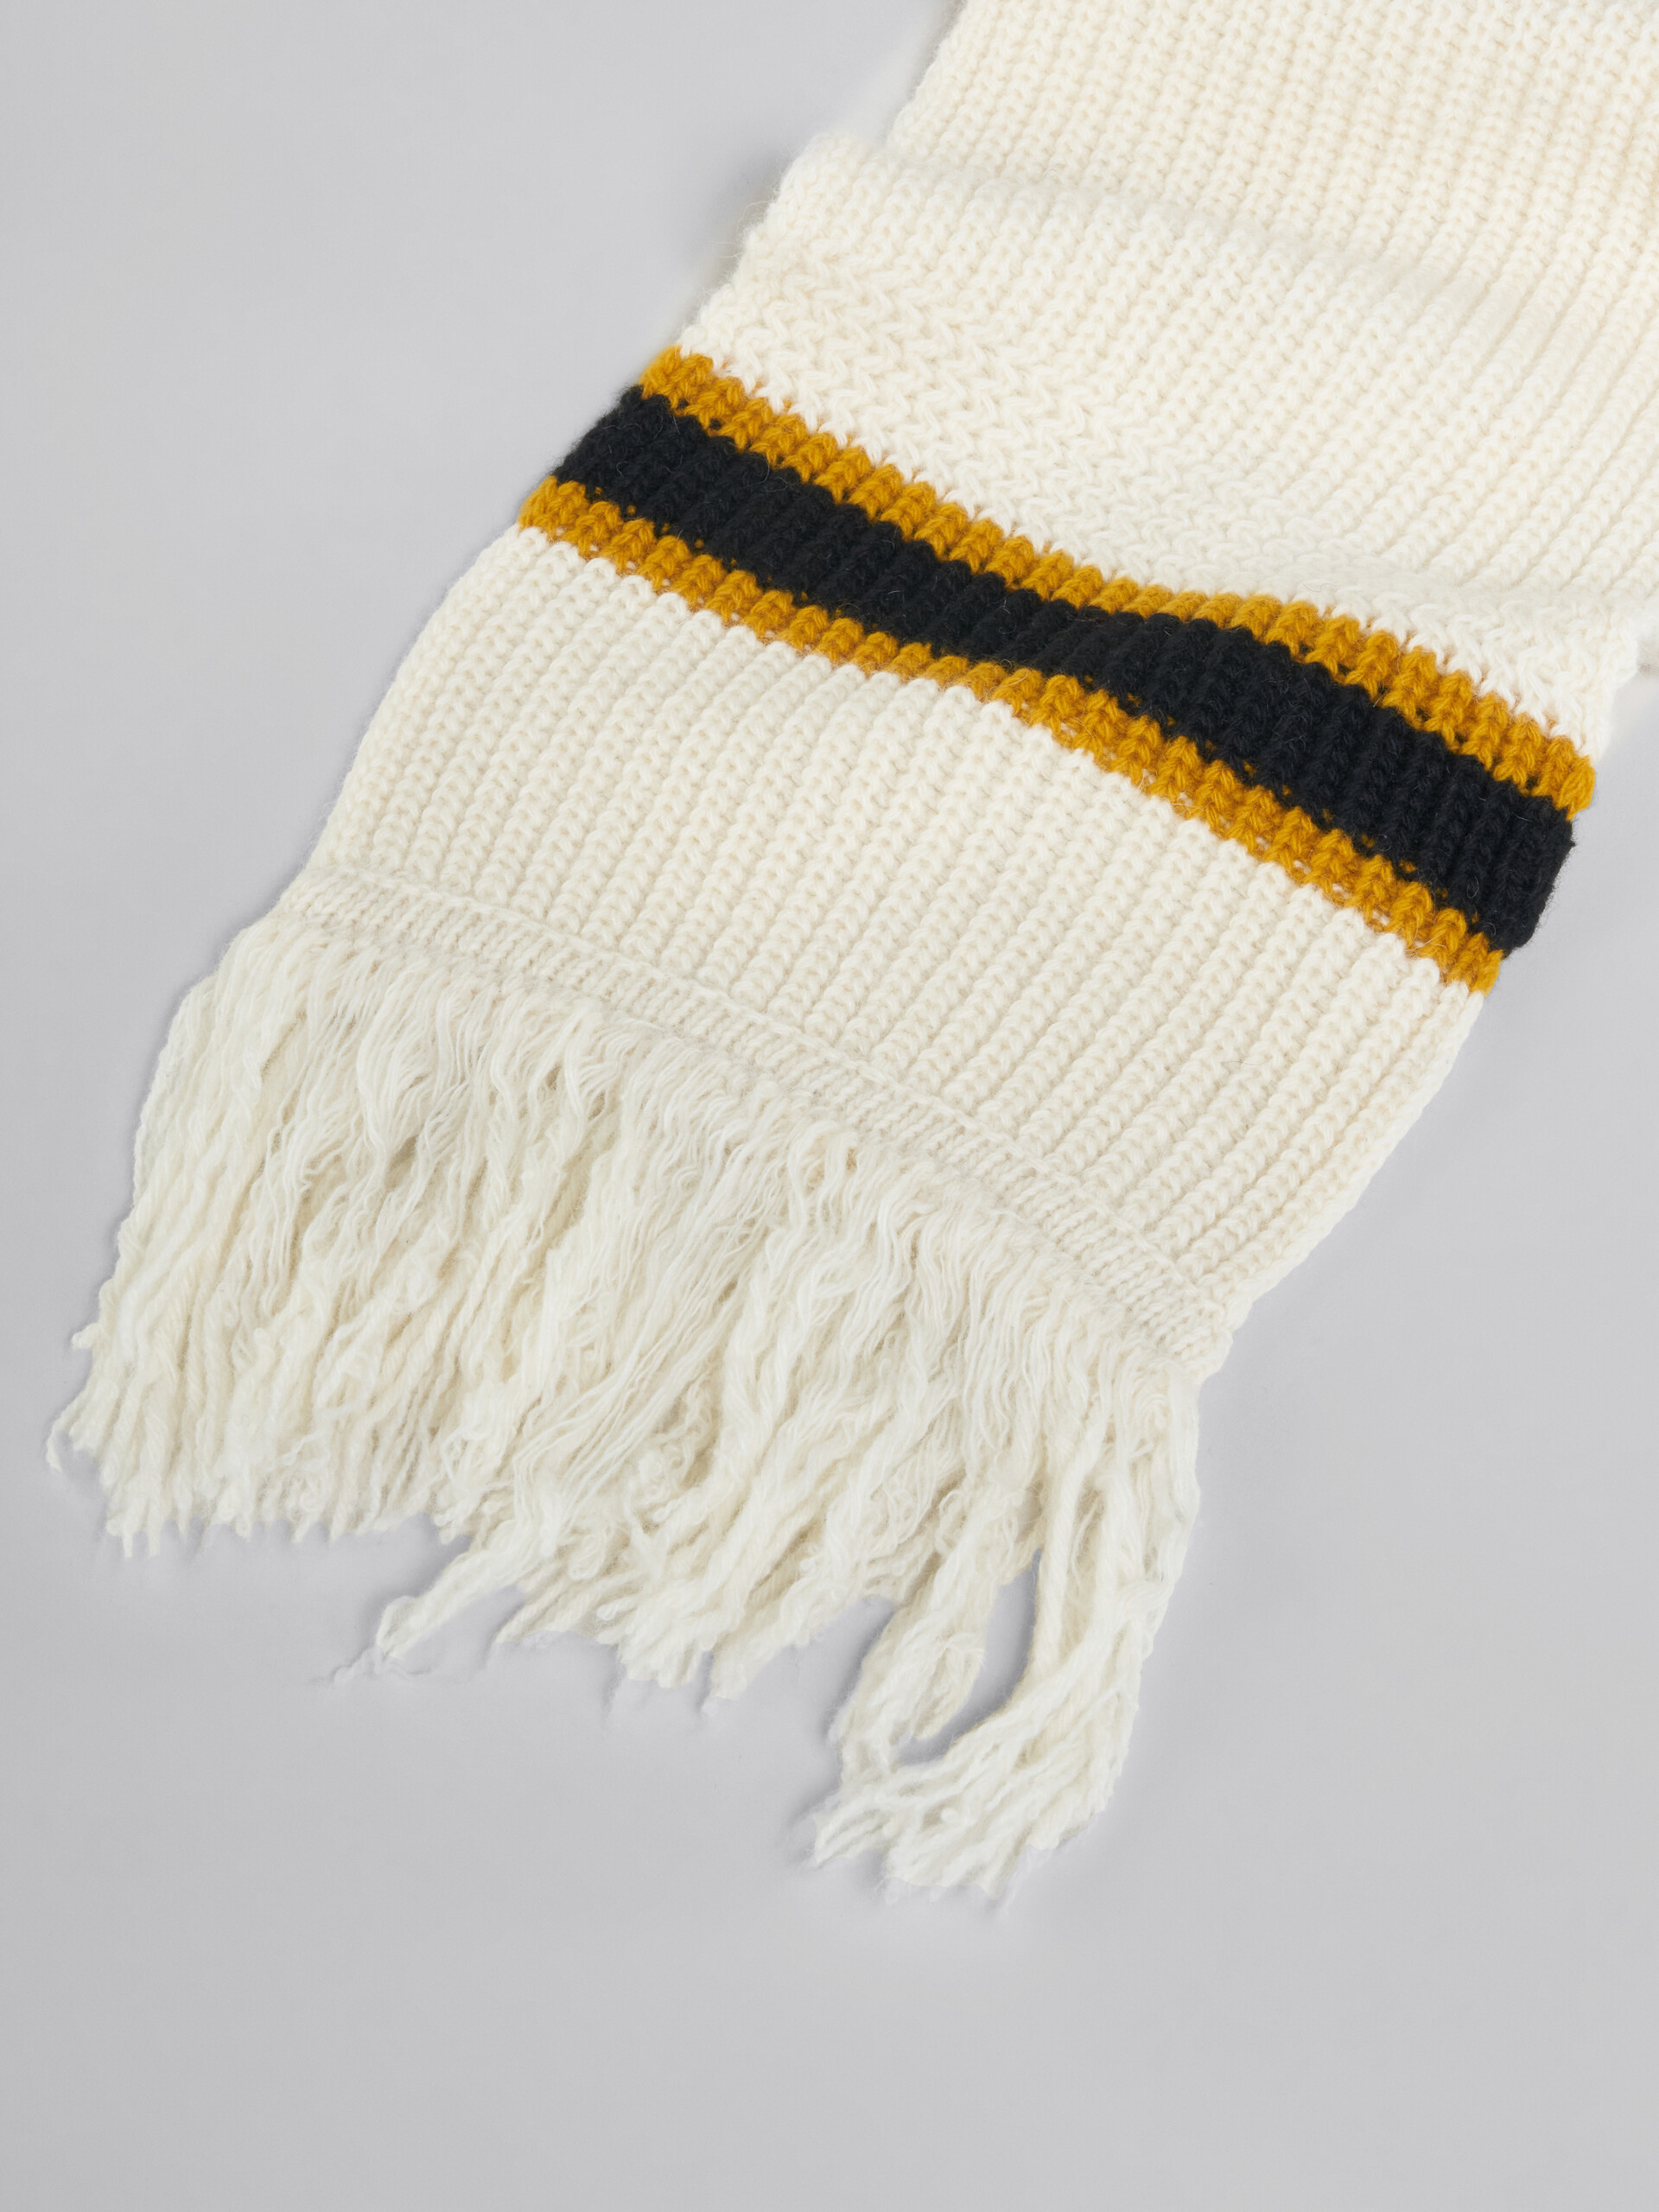 Knitted college-style scarf - Scarves - Image 4